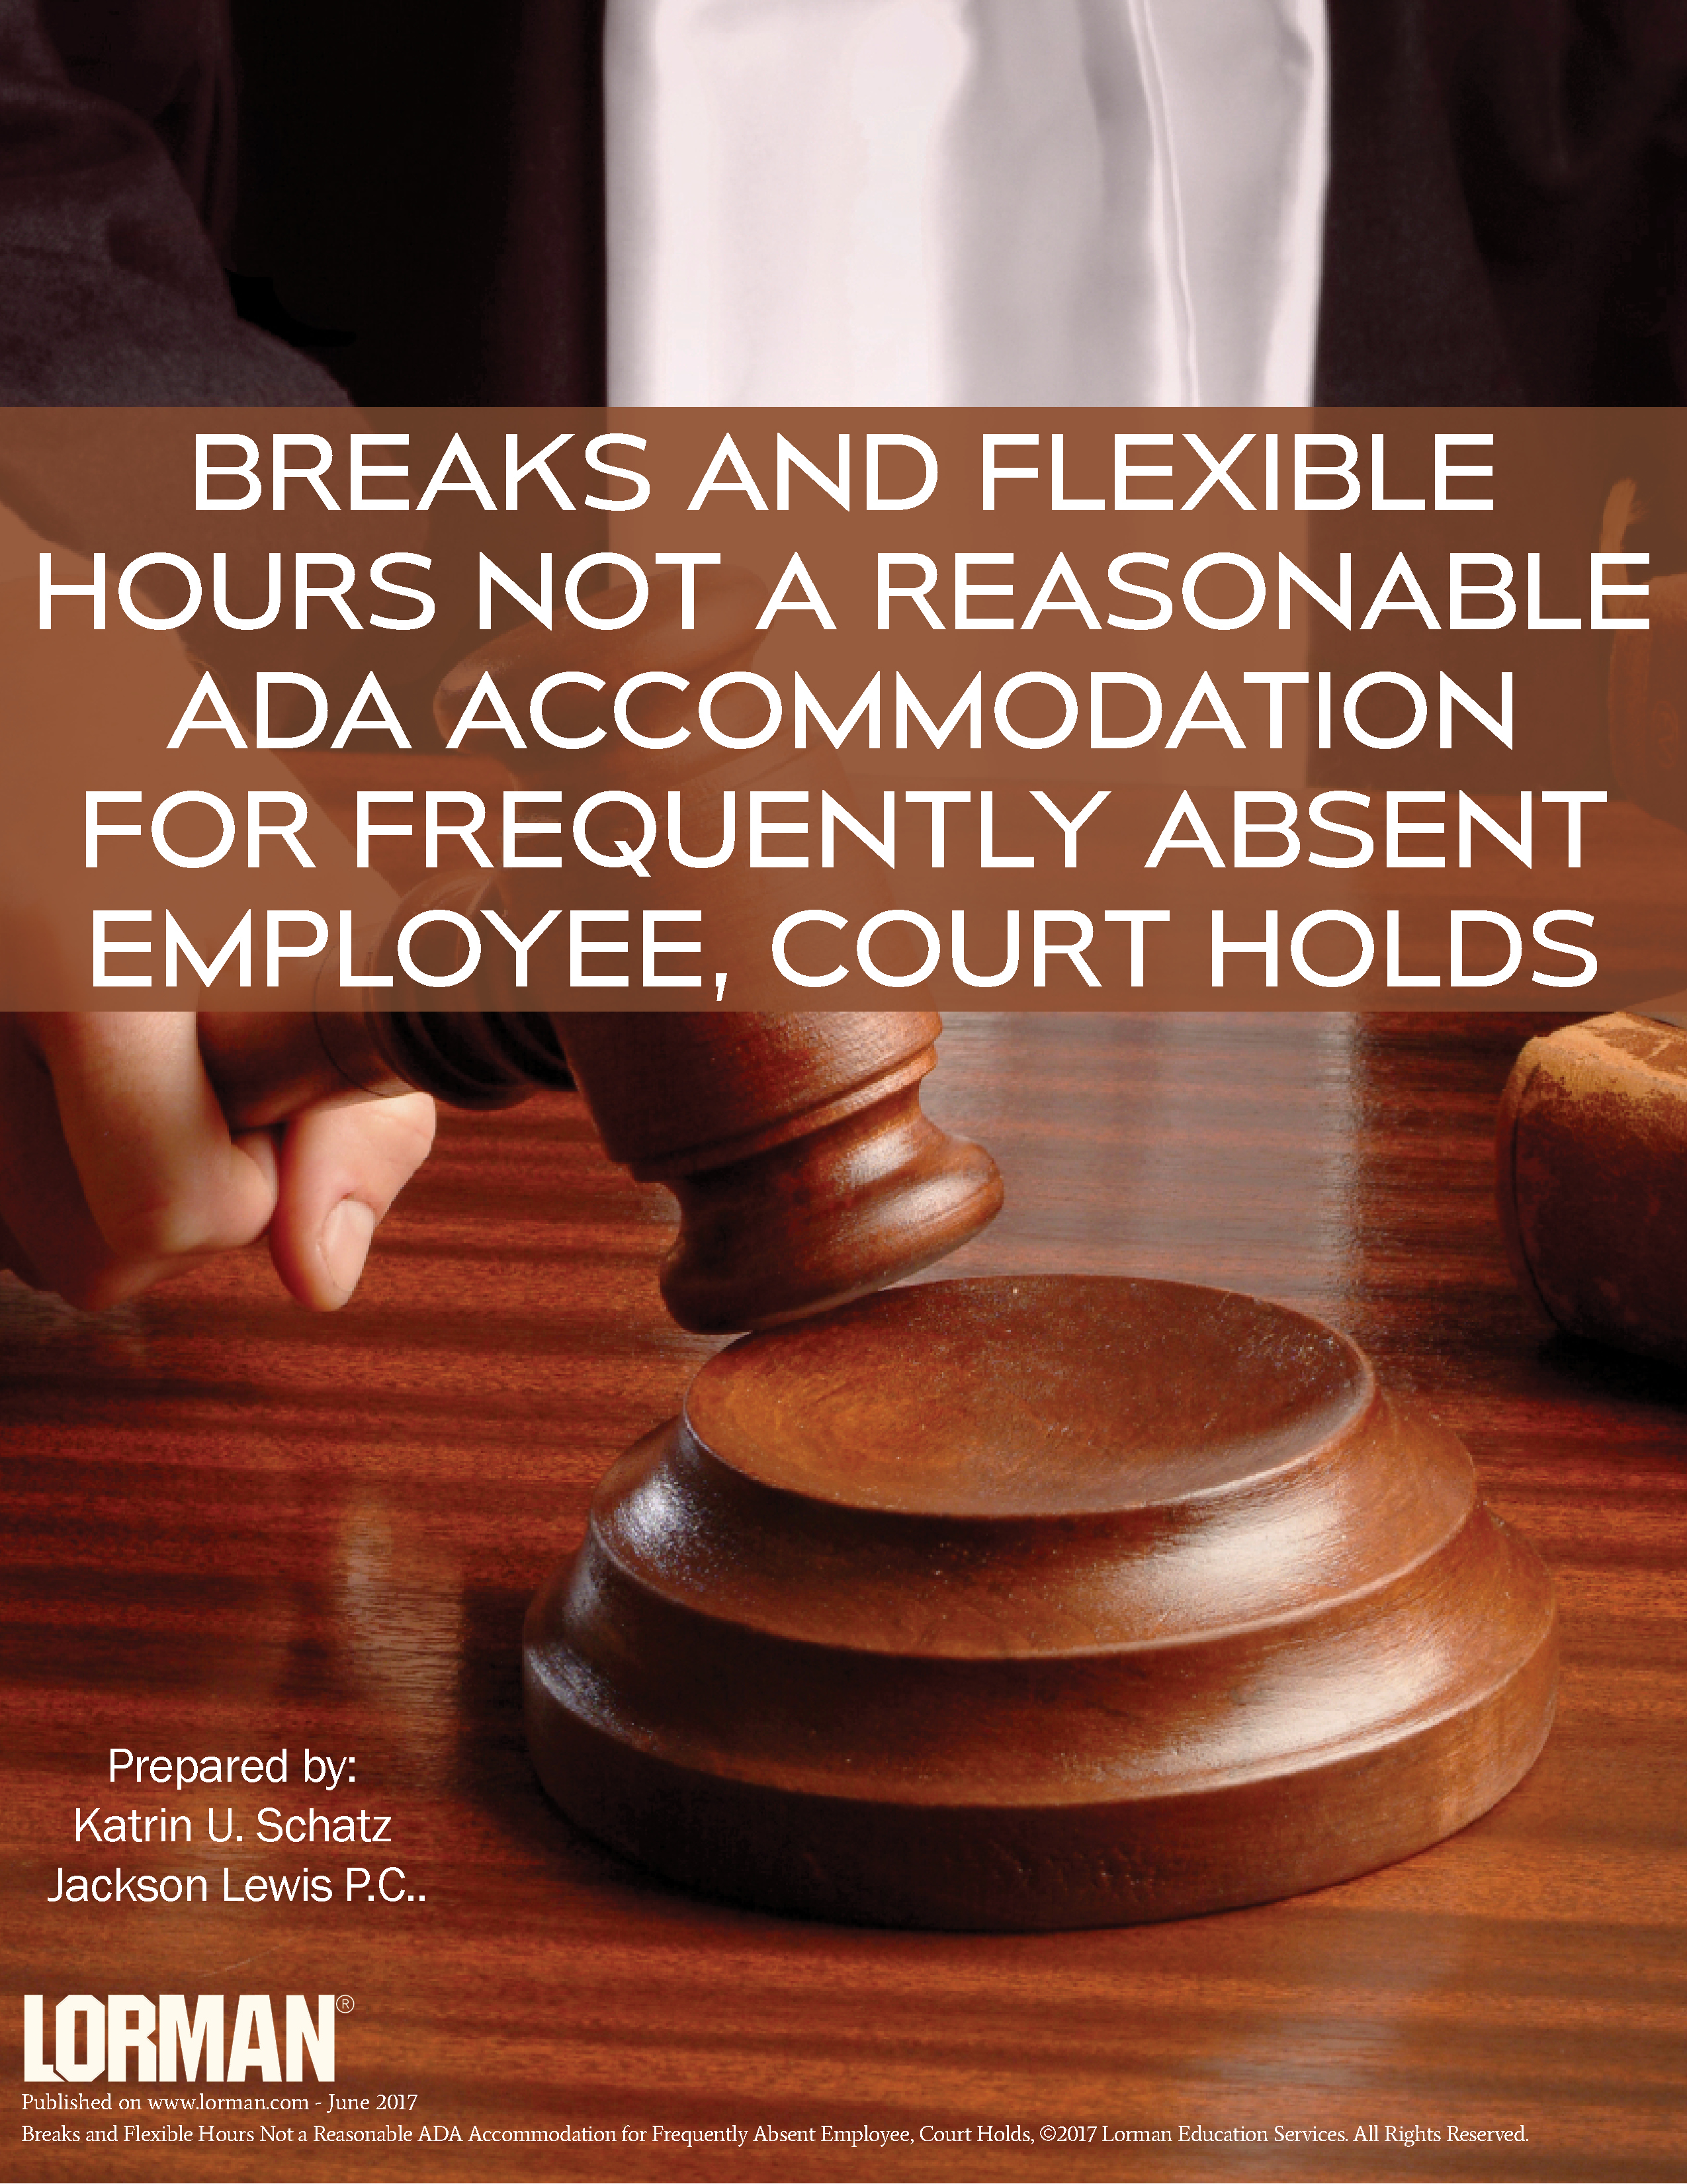 Breaks and Flexible Hours Not a Reasonable ADA Accommodation for Often Absent Employee, Court Holds